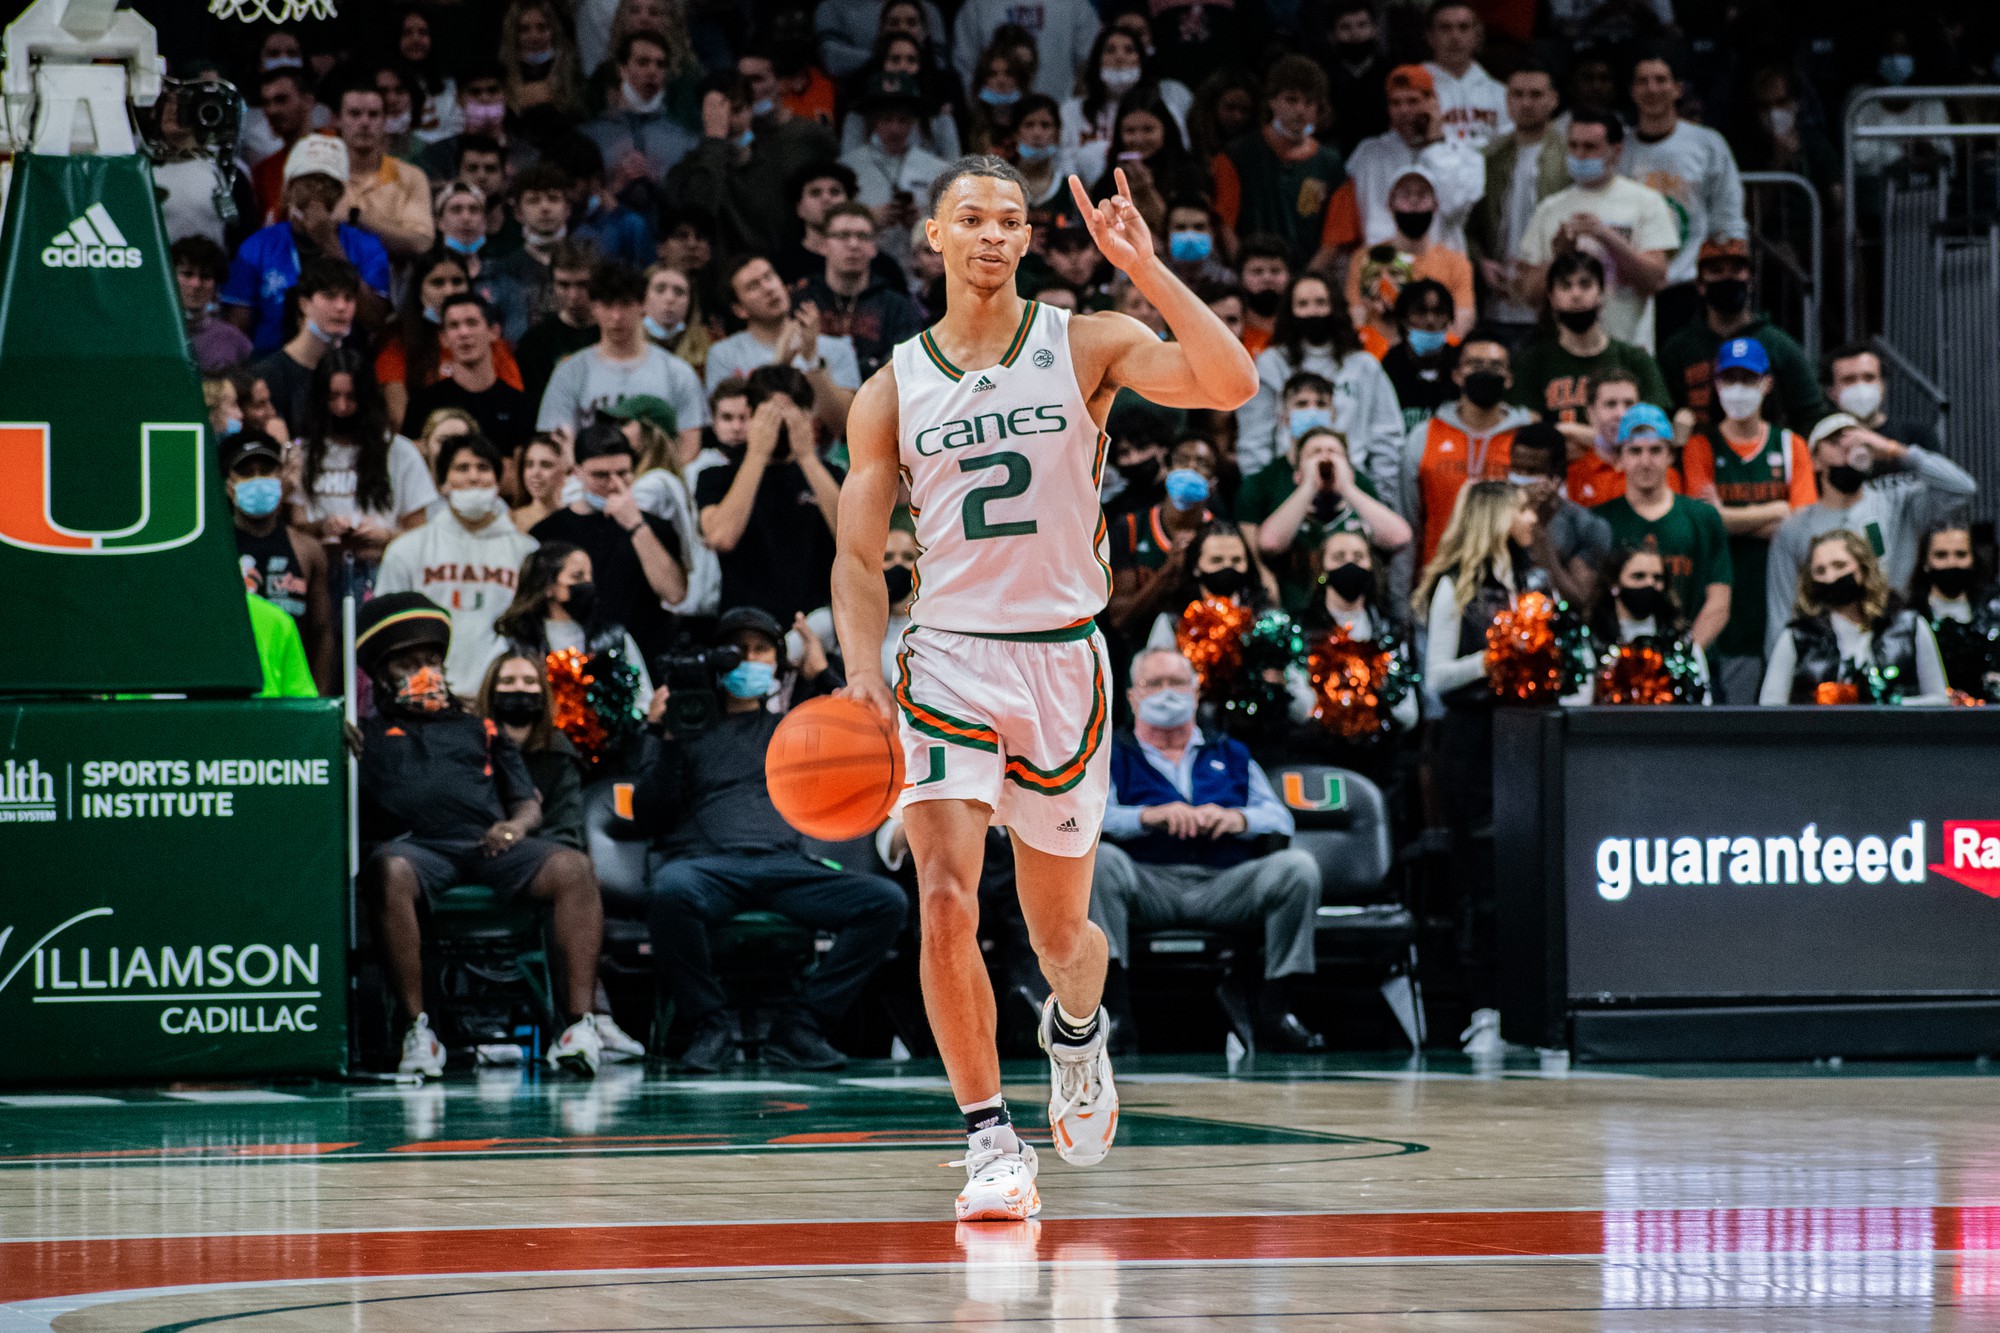 The Miami Hurricanes Are Dominating Recruiting After an Elite 8 Run